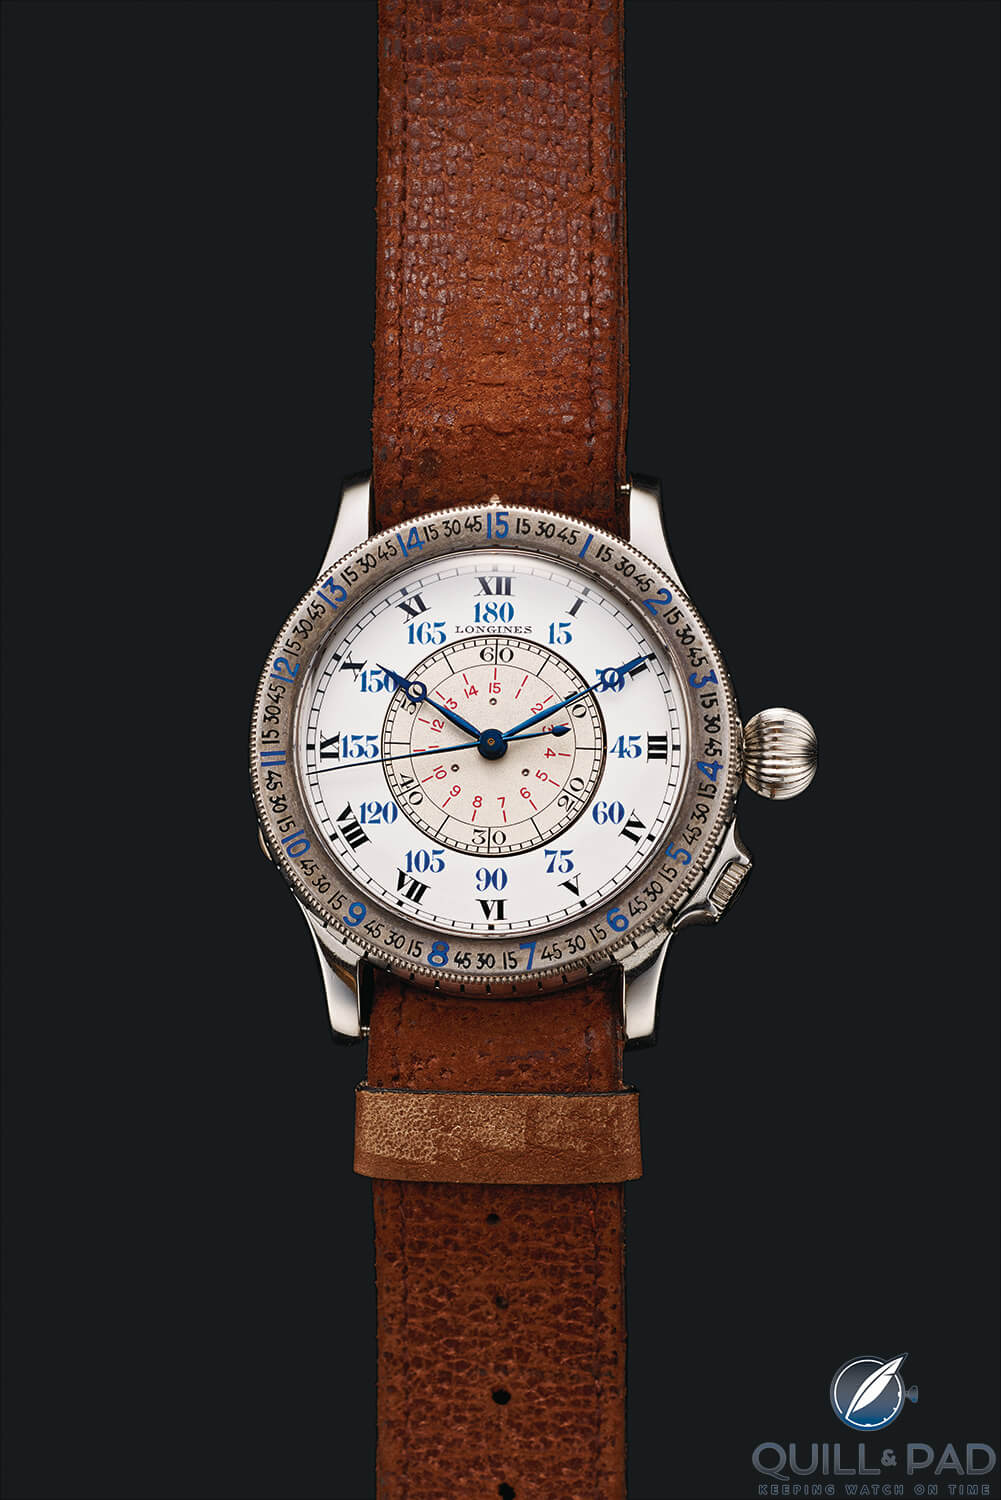 Longines Lindbergh Hour Angle designed by Charles Lindbergh and Philip Van Horn Weems from 'A Man and His Watch'